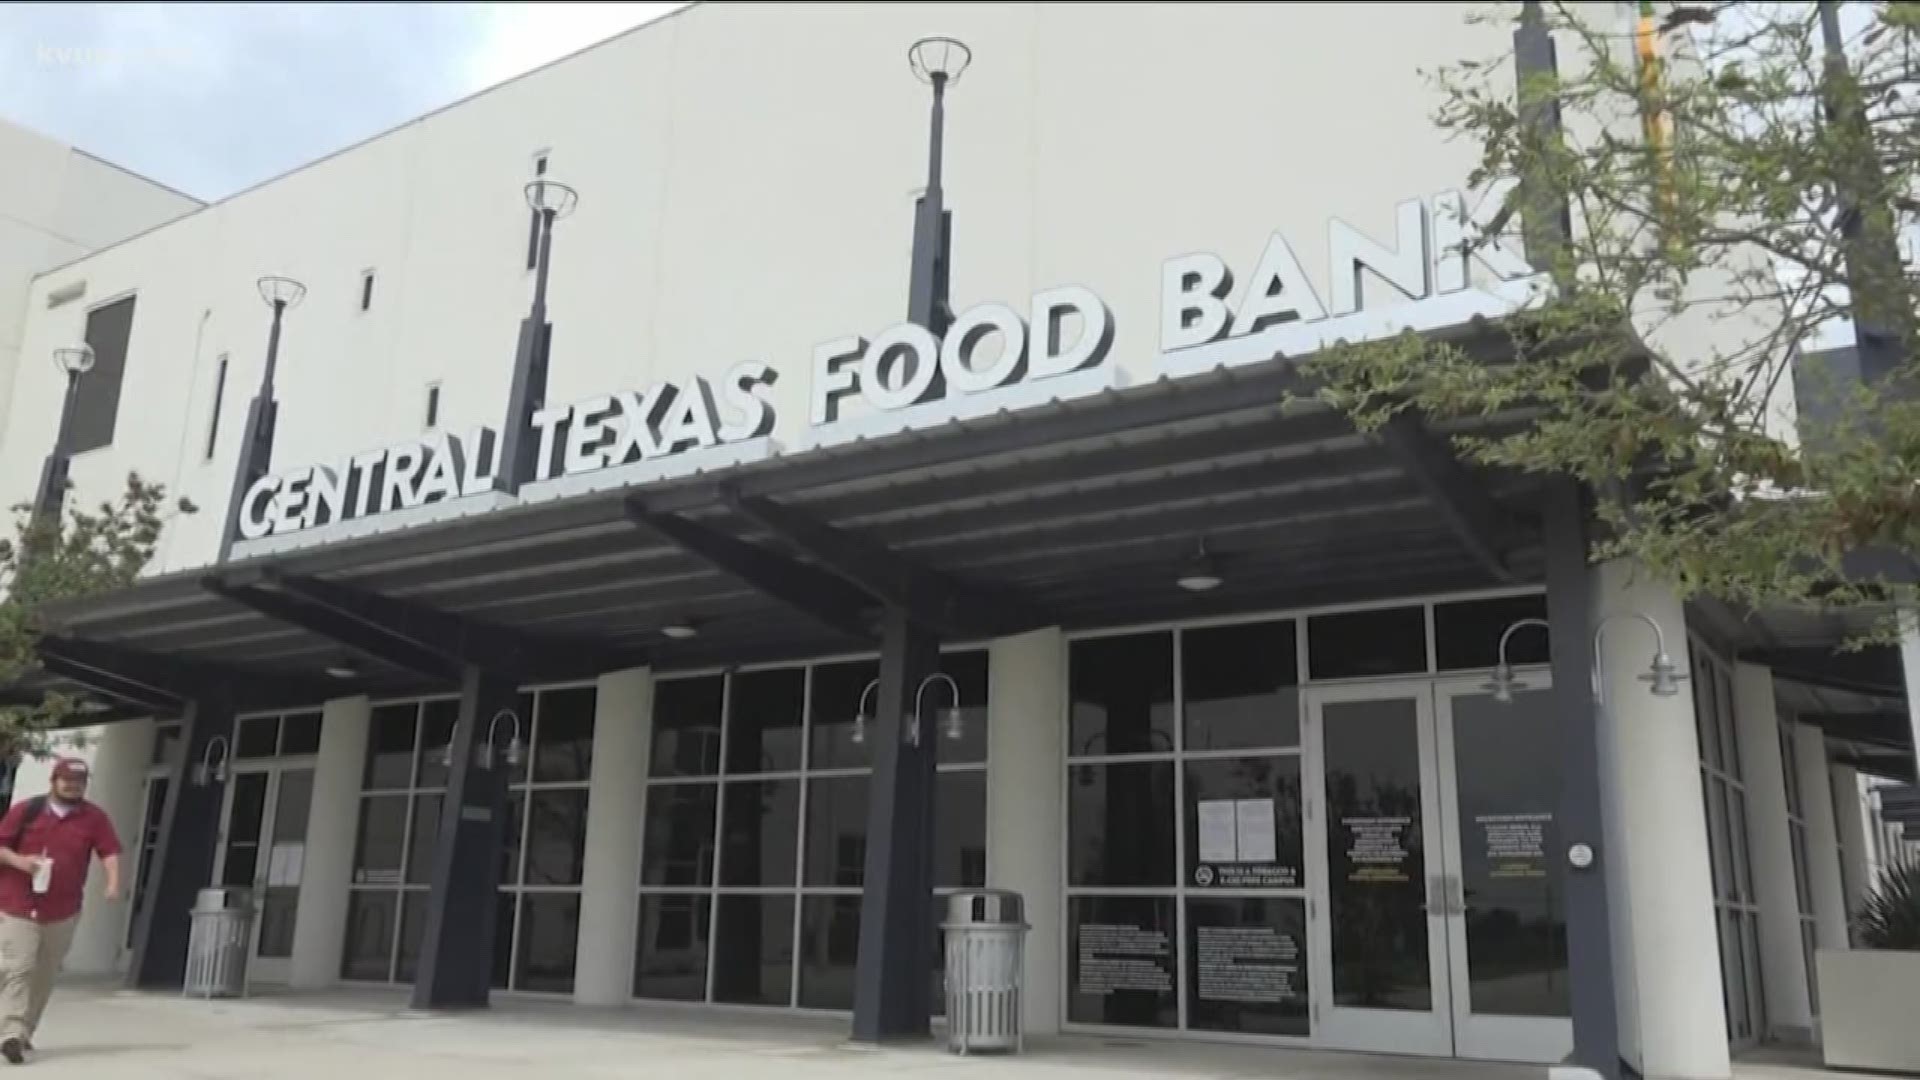 Help for Seniors  Central Texas Food Bank